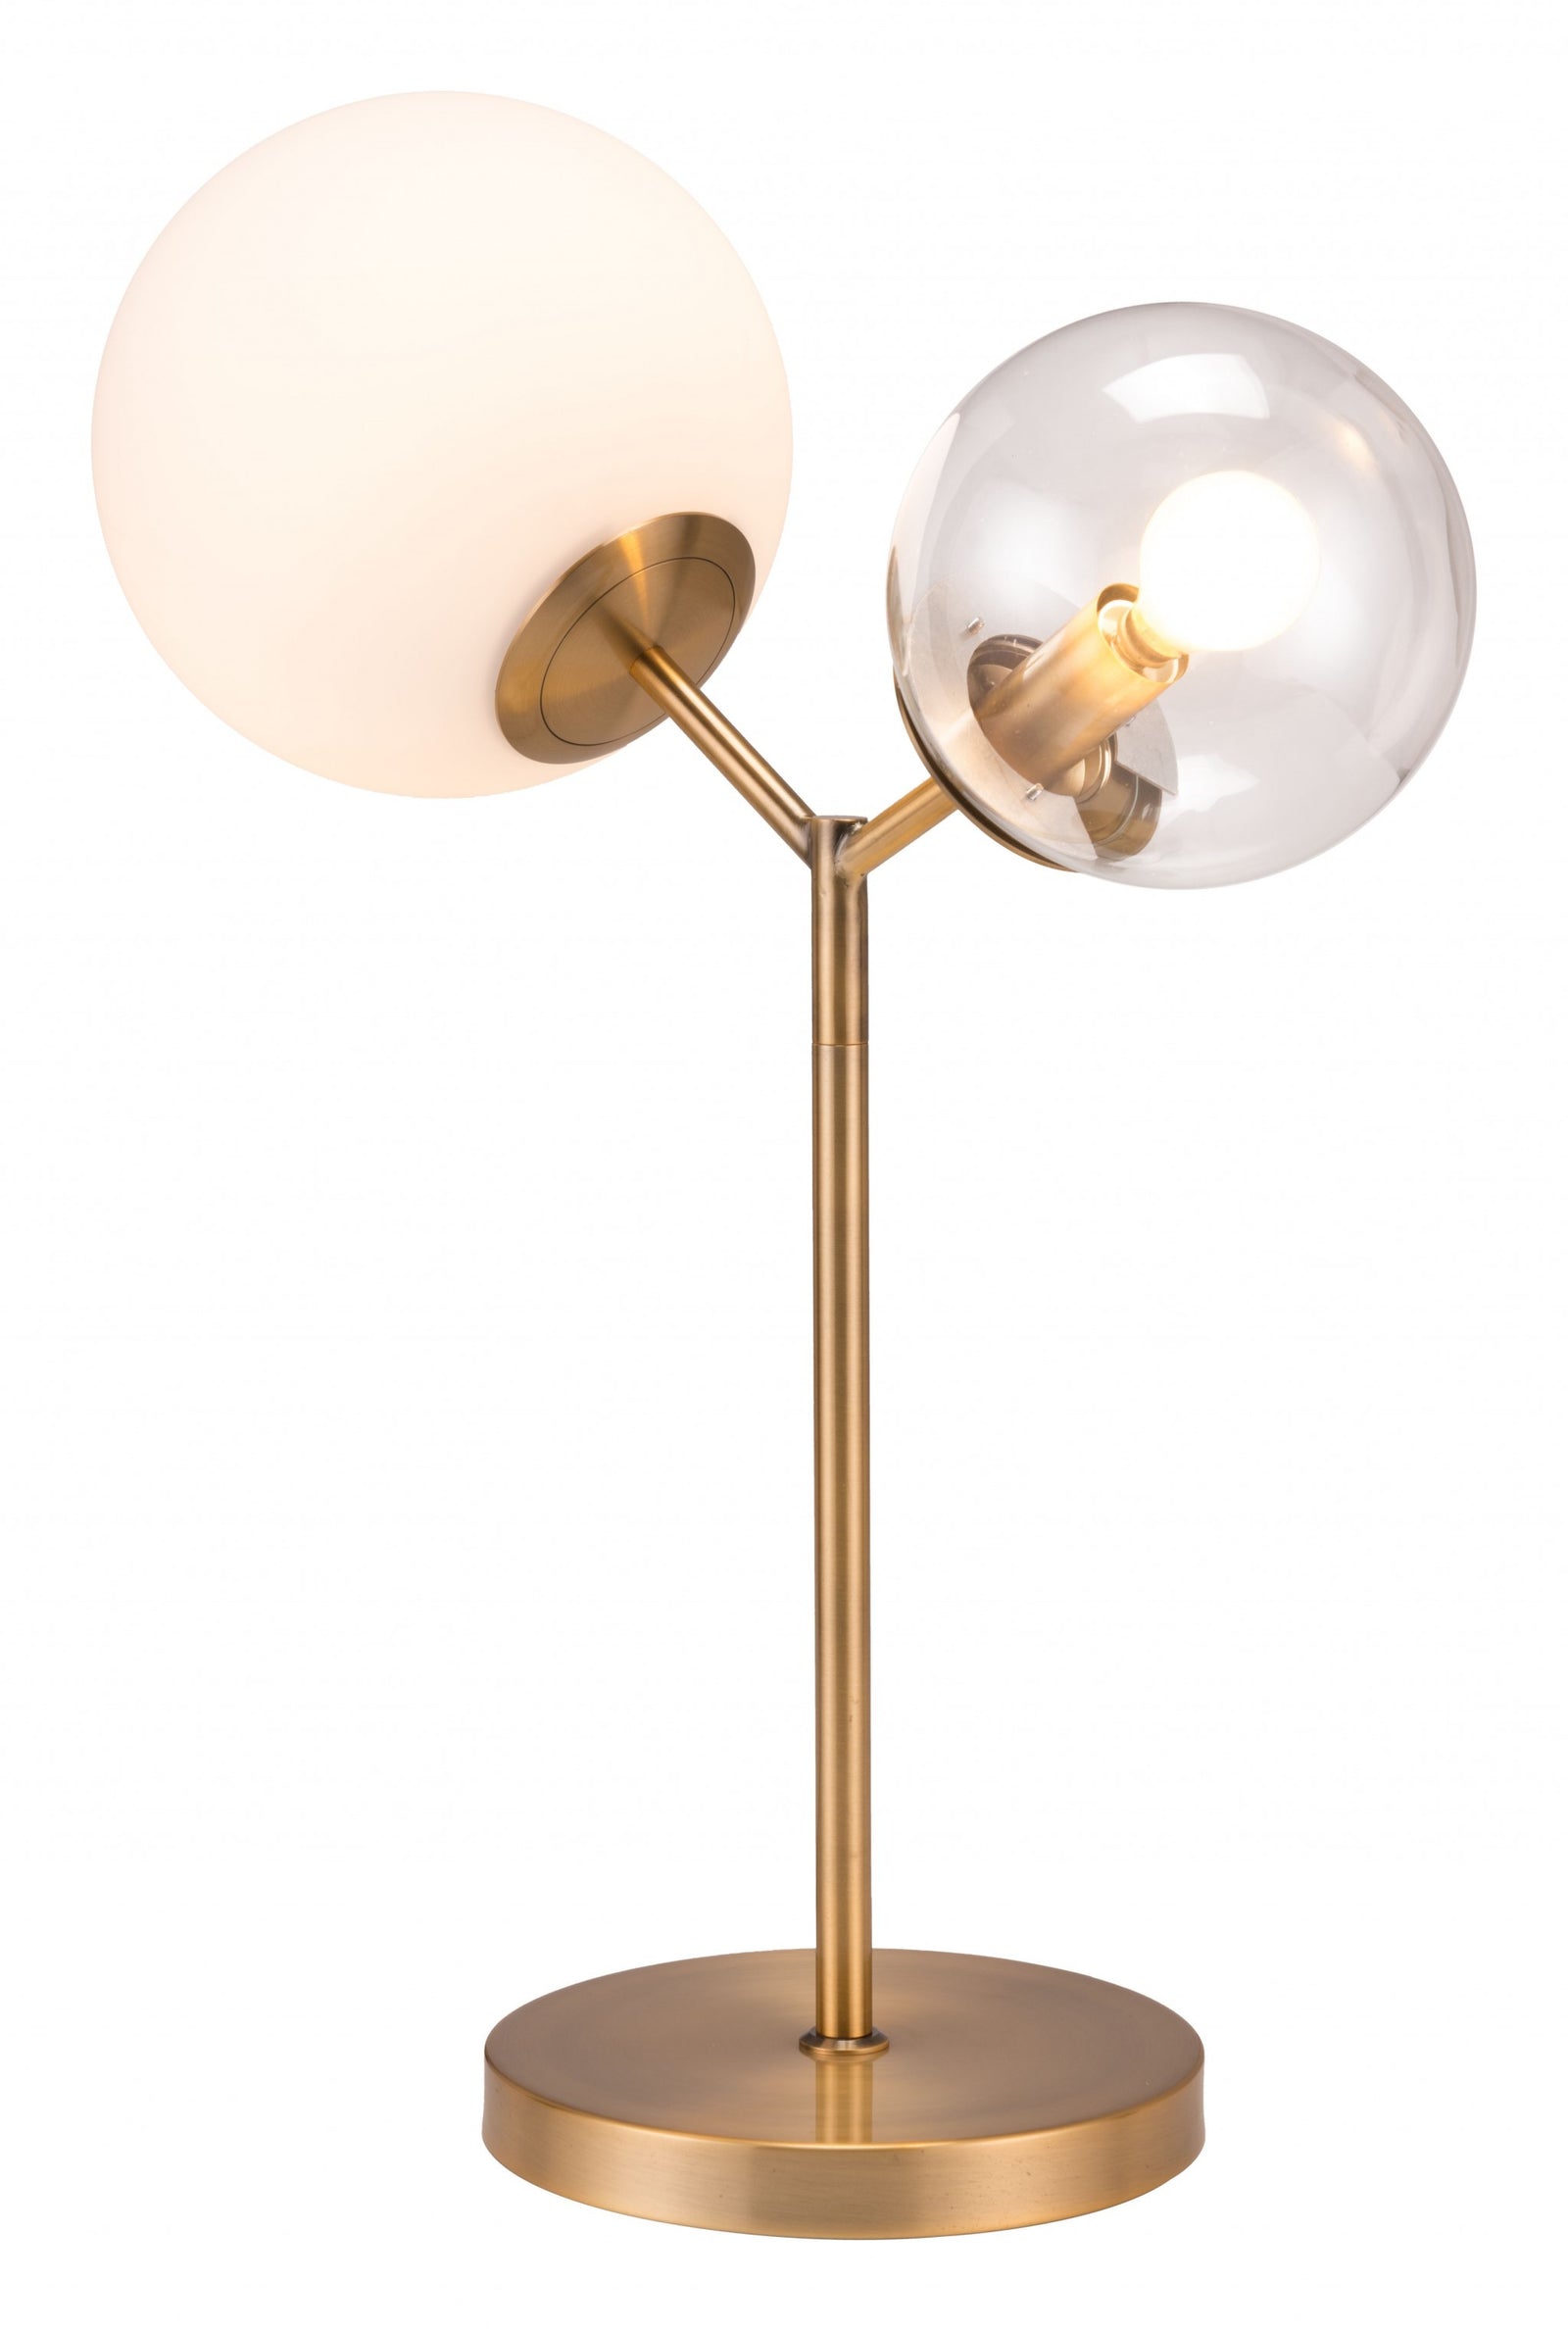 56" Copper Metal Bedside Table Lamp With Clear Globe Shade